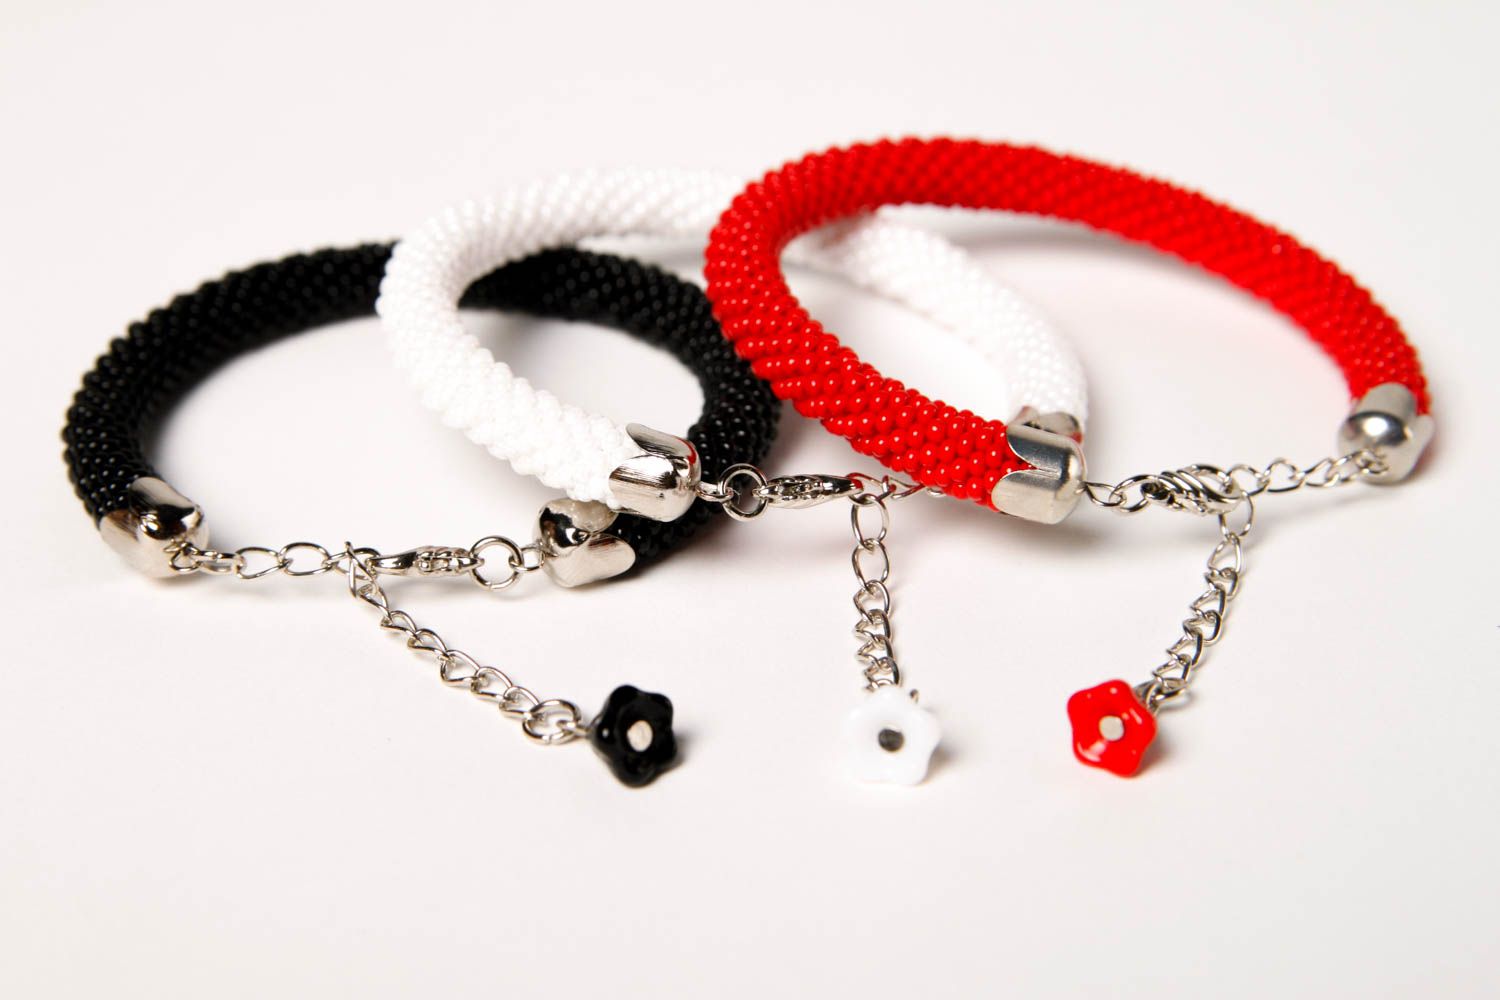 Handmade three-row beaded cord bracelet in black, red, and white colors photo 4